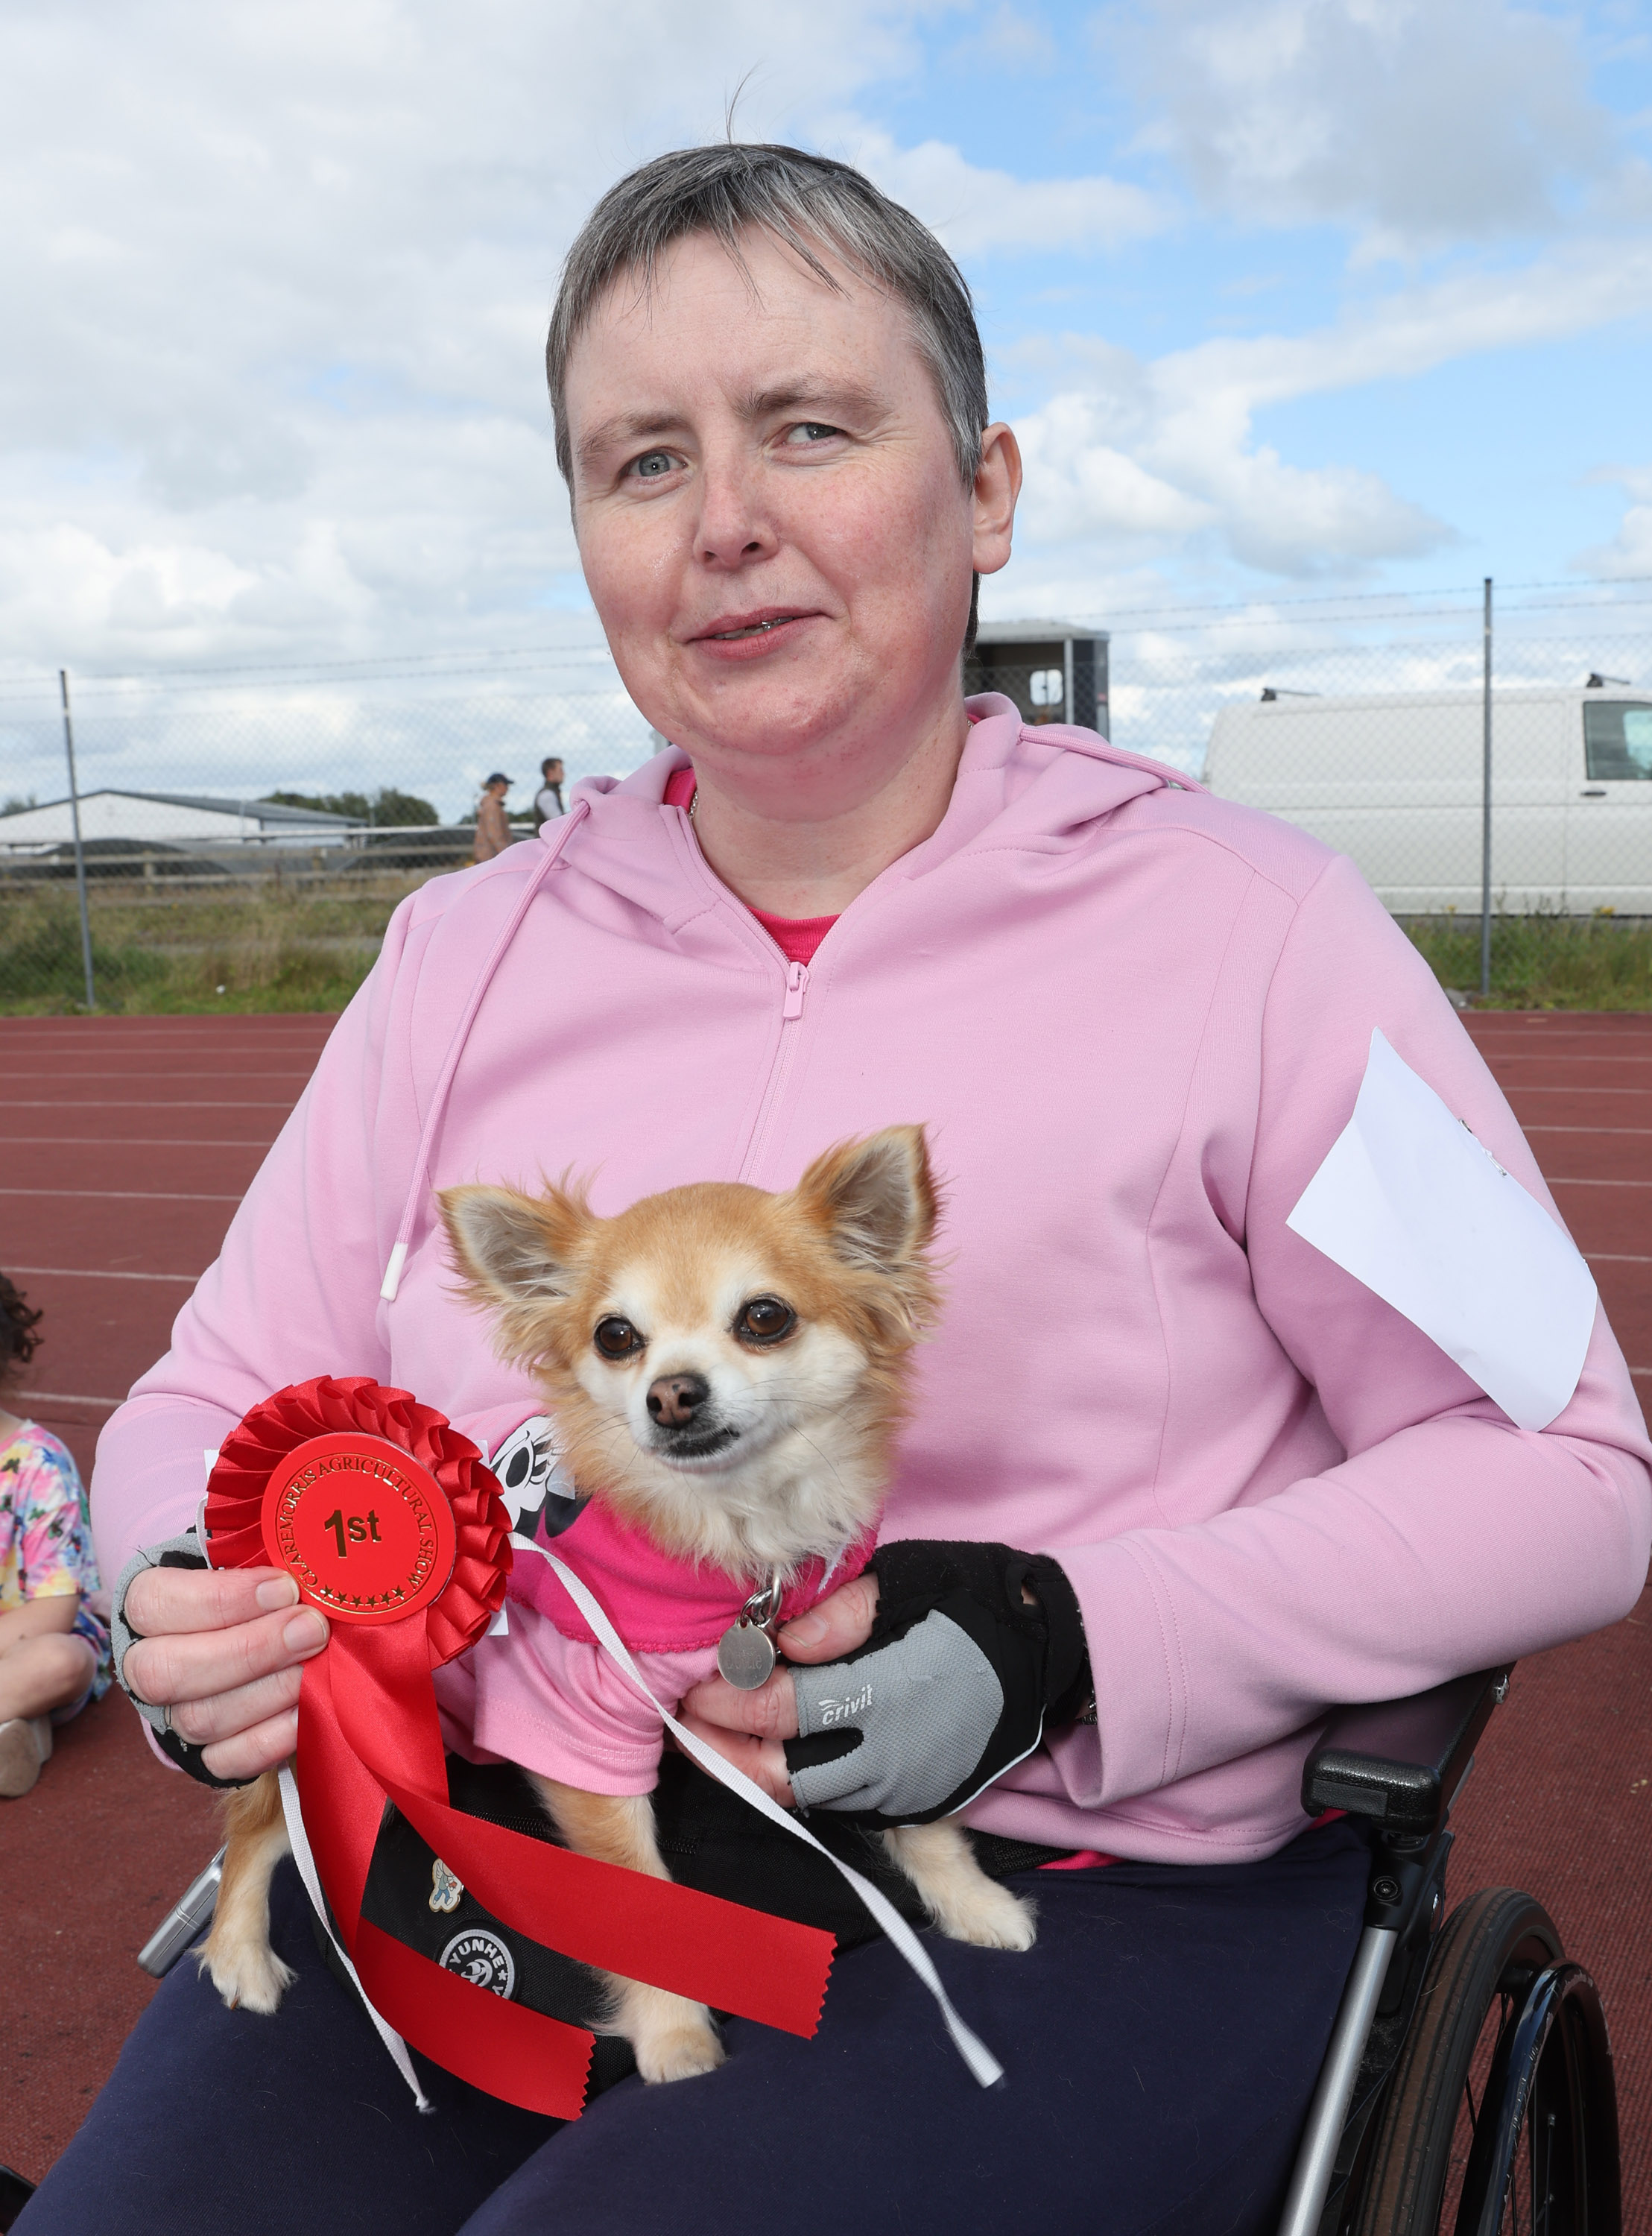 Fiona  Navin Claremorris wth her dog "Dottie" who  won 1st prize for in the Fancy Dress competition at  the Claremorris 103rd Show in Claremorris on 5th August. Photo © Michael Donnelly